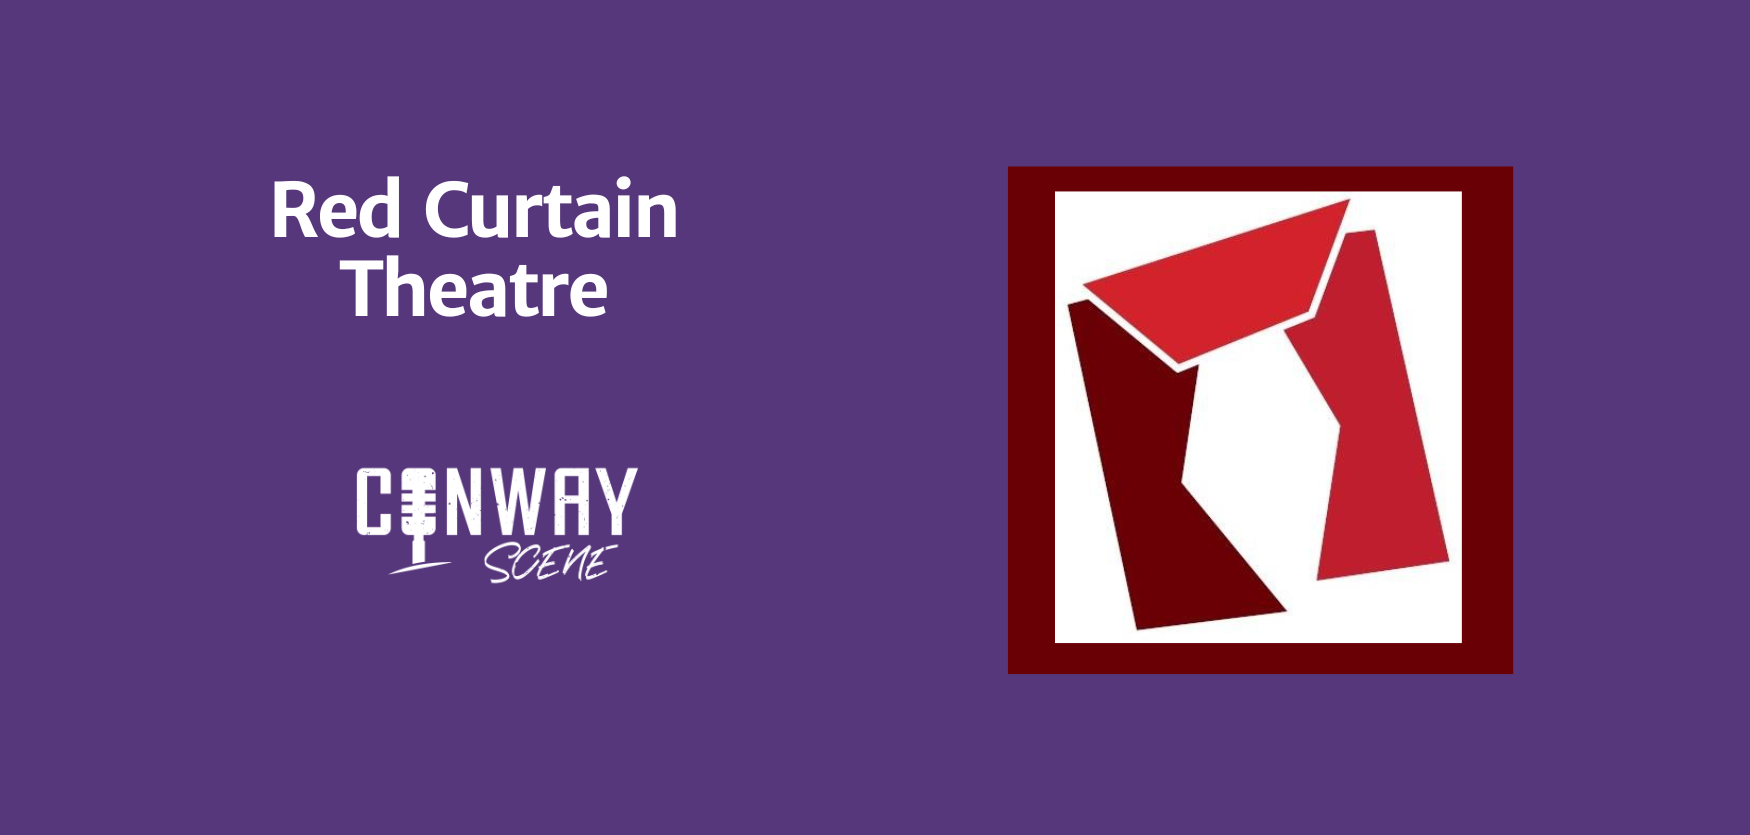 Red Curtain Theatre